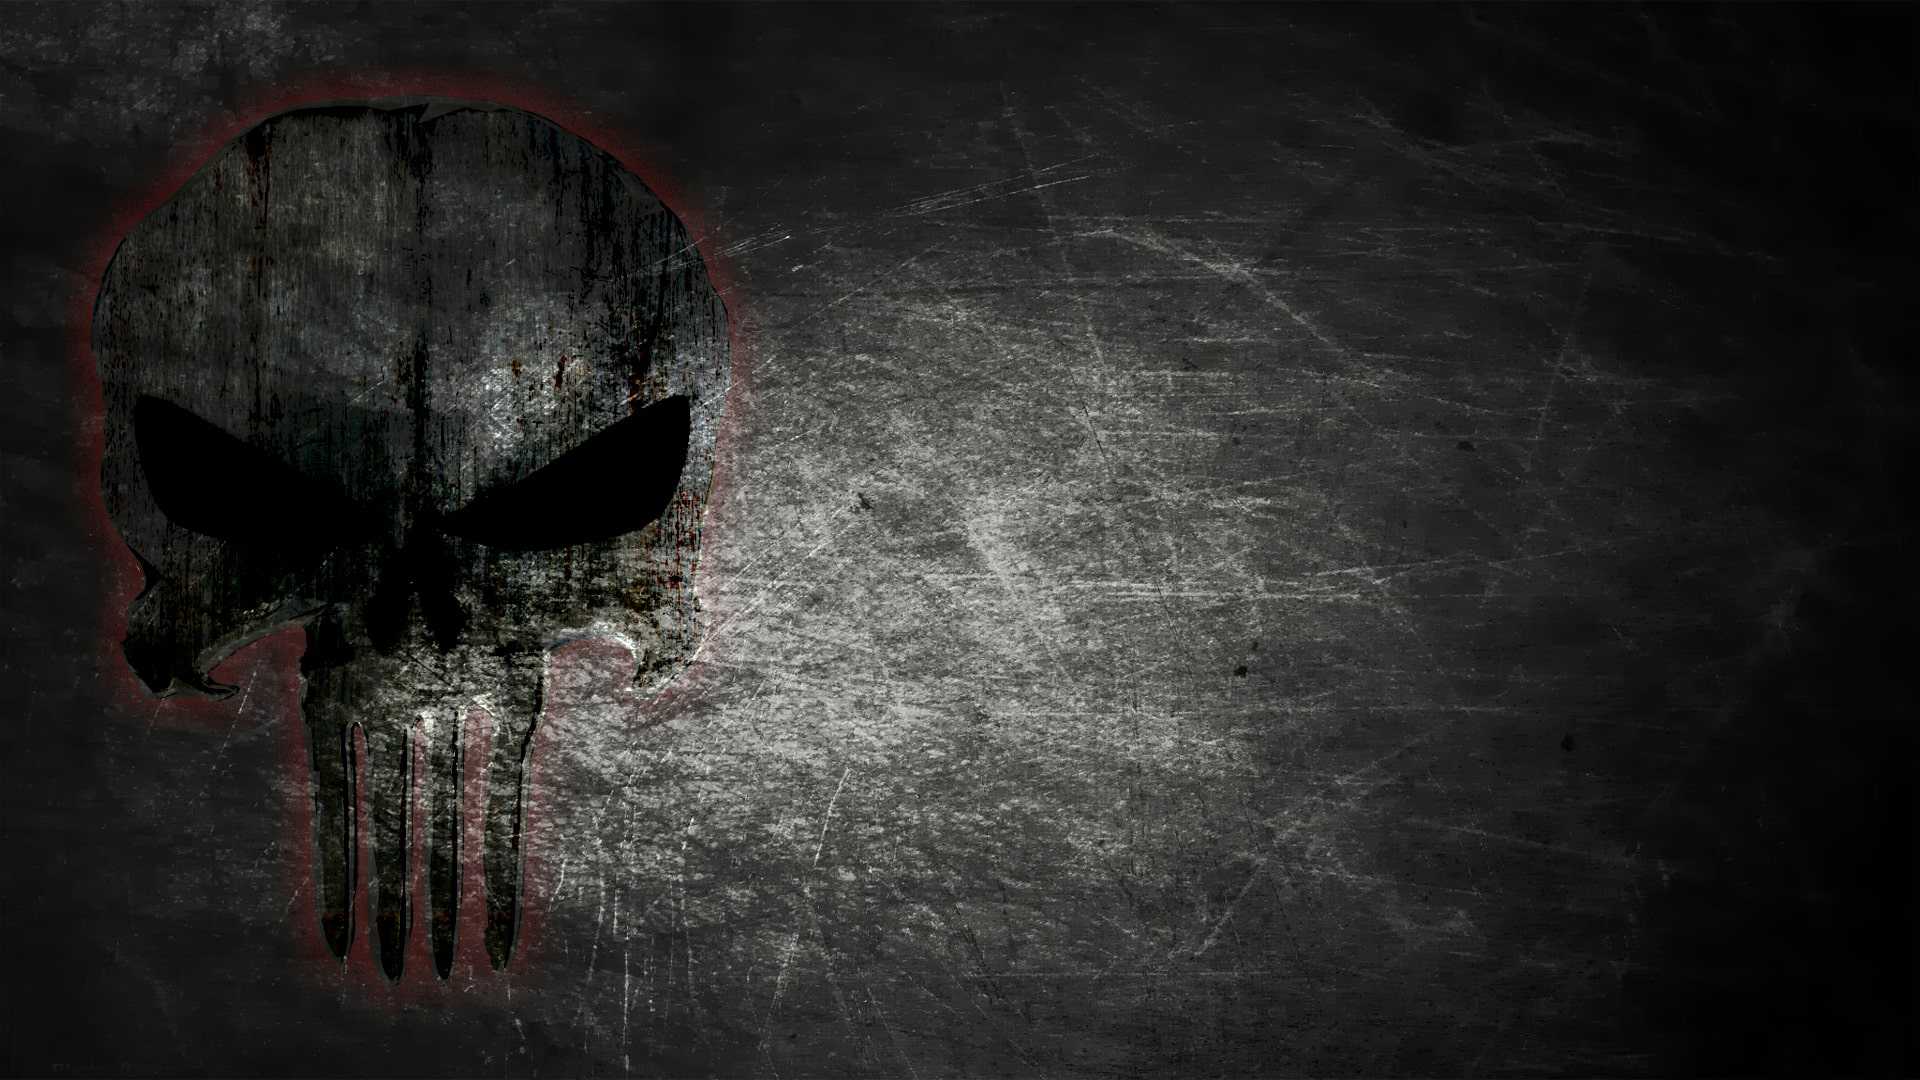 4K Ultra Hd Punisher Wallpapers